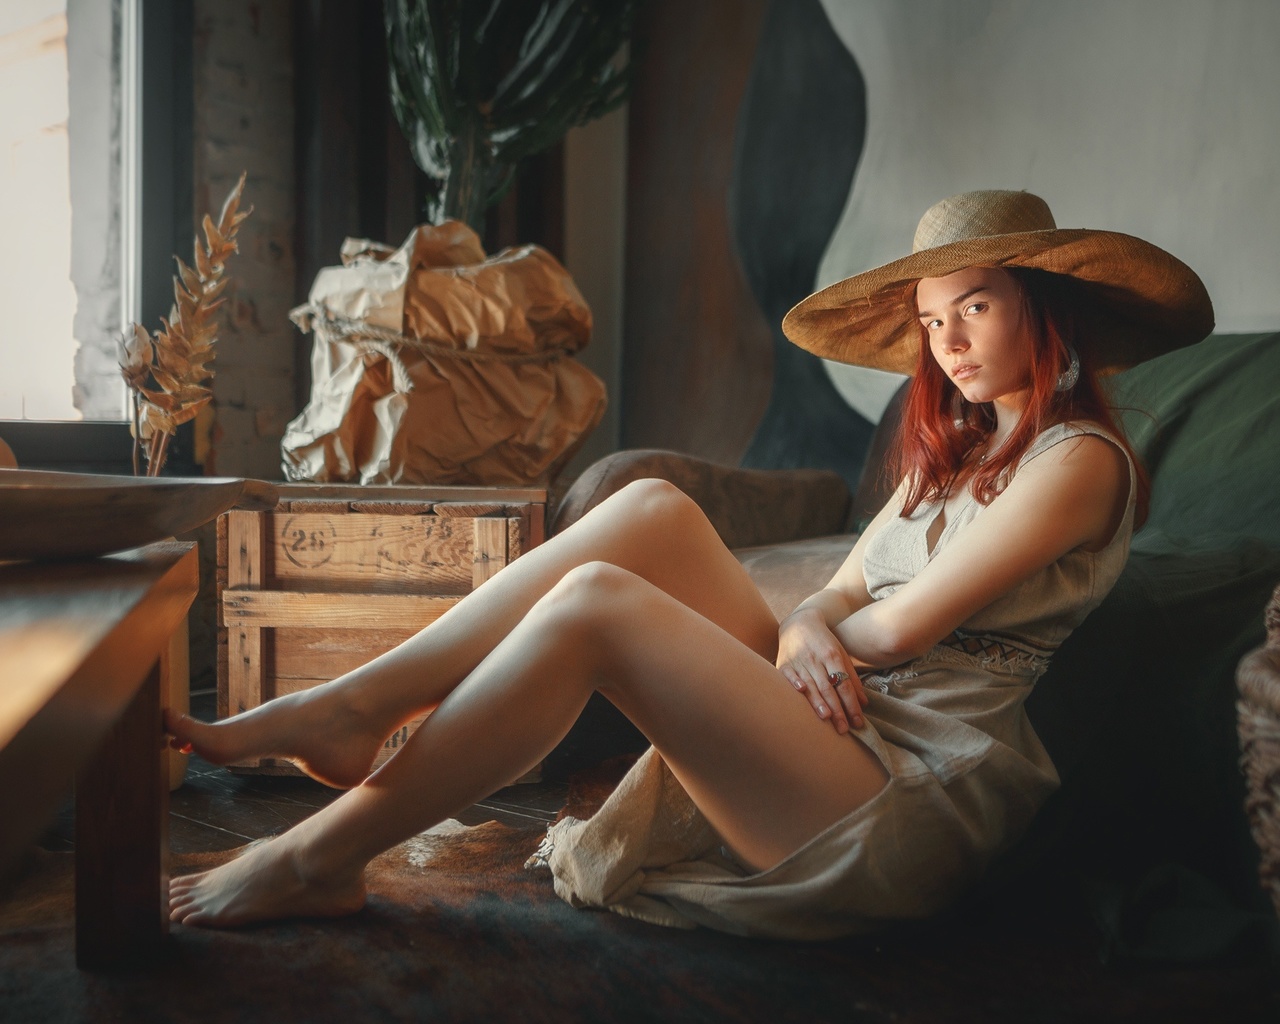 women, model, redhead, women indoors, dress, sitting, hat, table, window, couch, barefoot, guitar